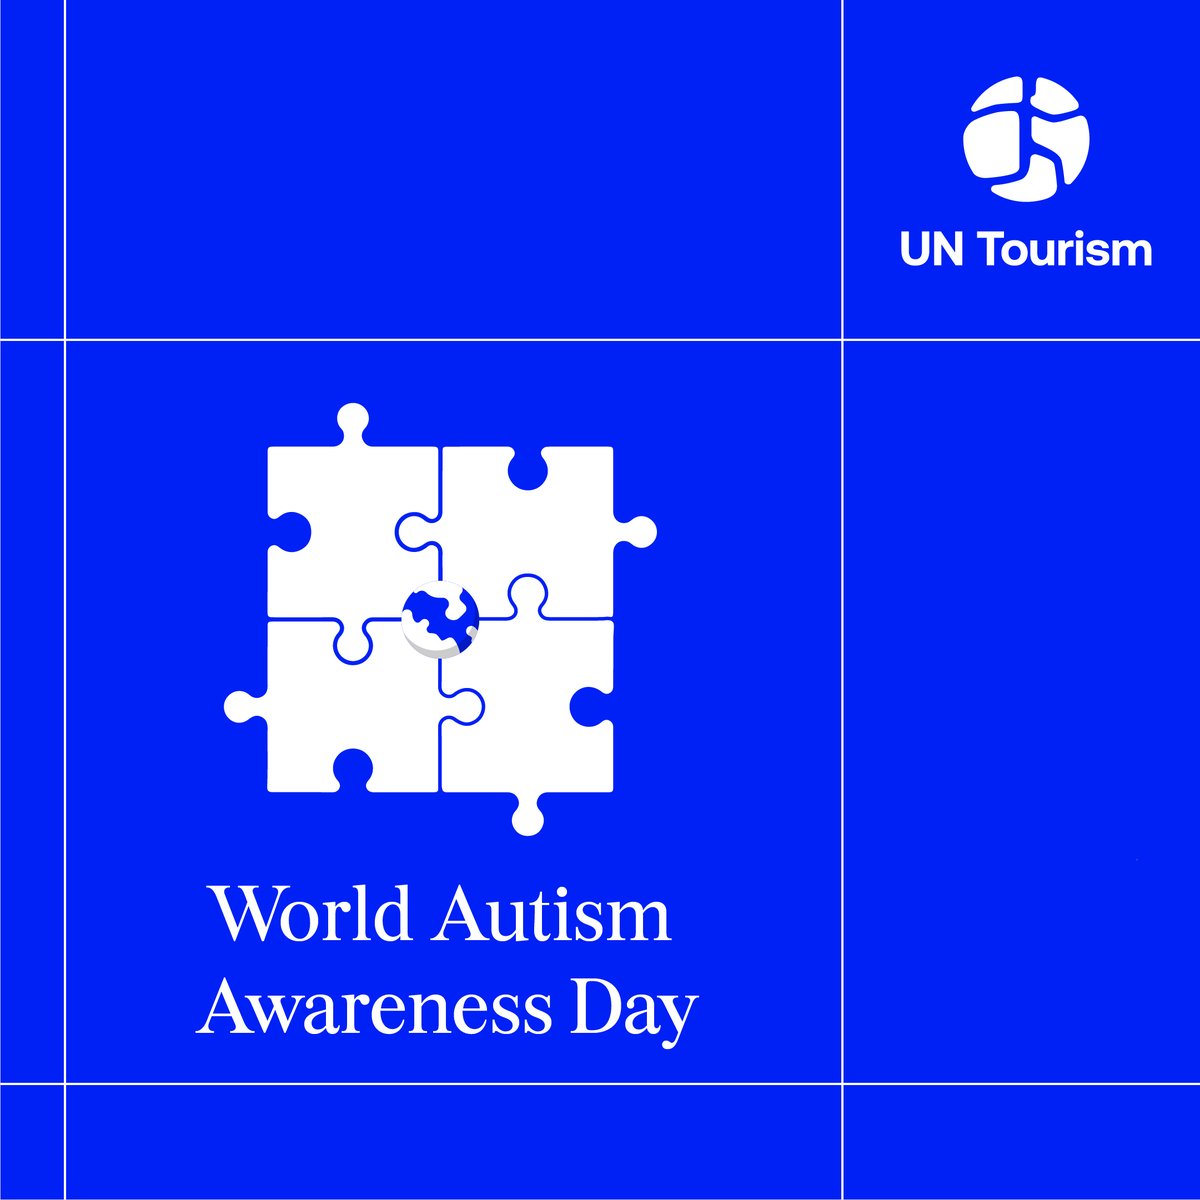 This #WorldAutism AwarenessDay, UN Tourism is promoting Tourism for All and everyone's right to enjoy the true beauty of nature through accessible tourism experiences. 🤝

☝Download  our guidelines on creating #accessibleexperiences and #natureforall .

webunwto.s3.eu-west-1.amazonaws.com/s3fs-public/20…